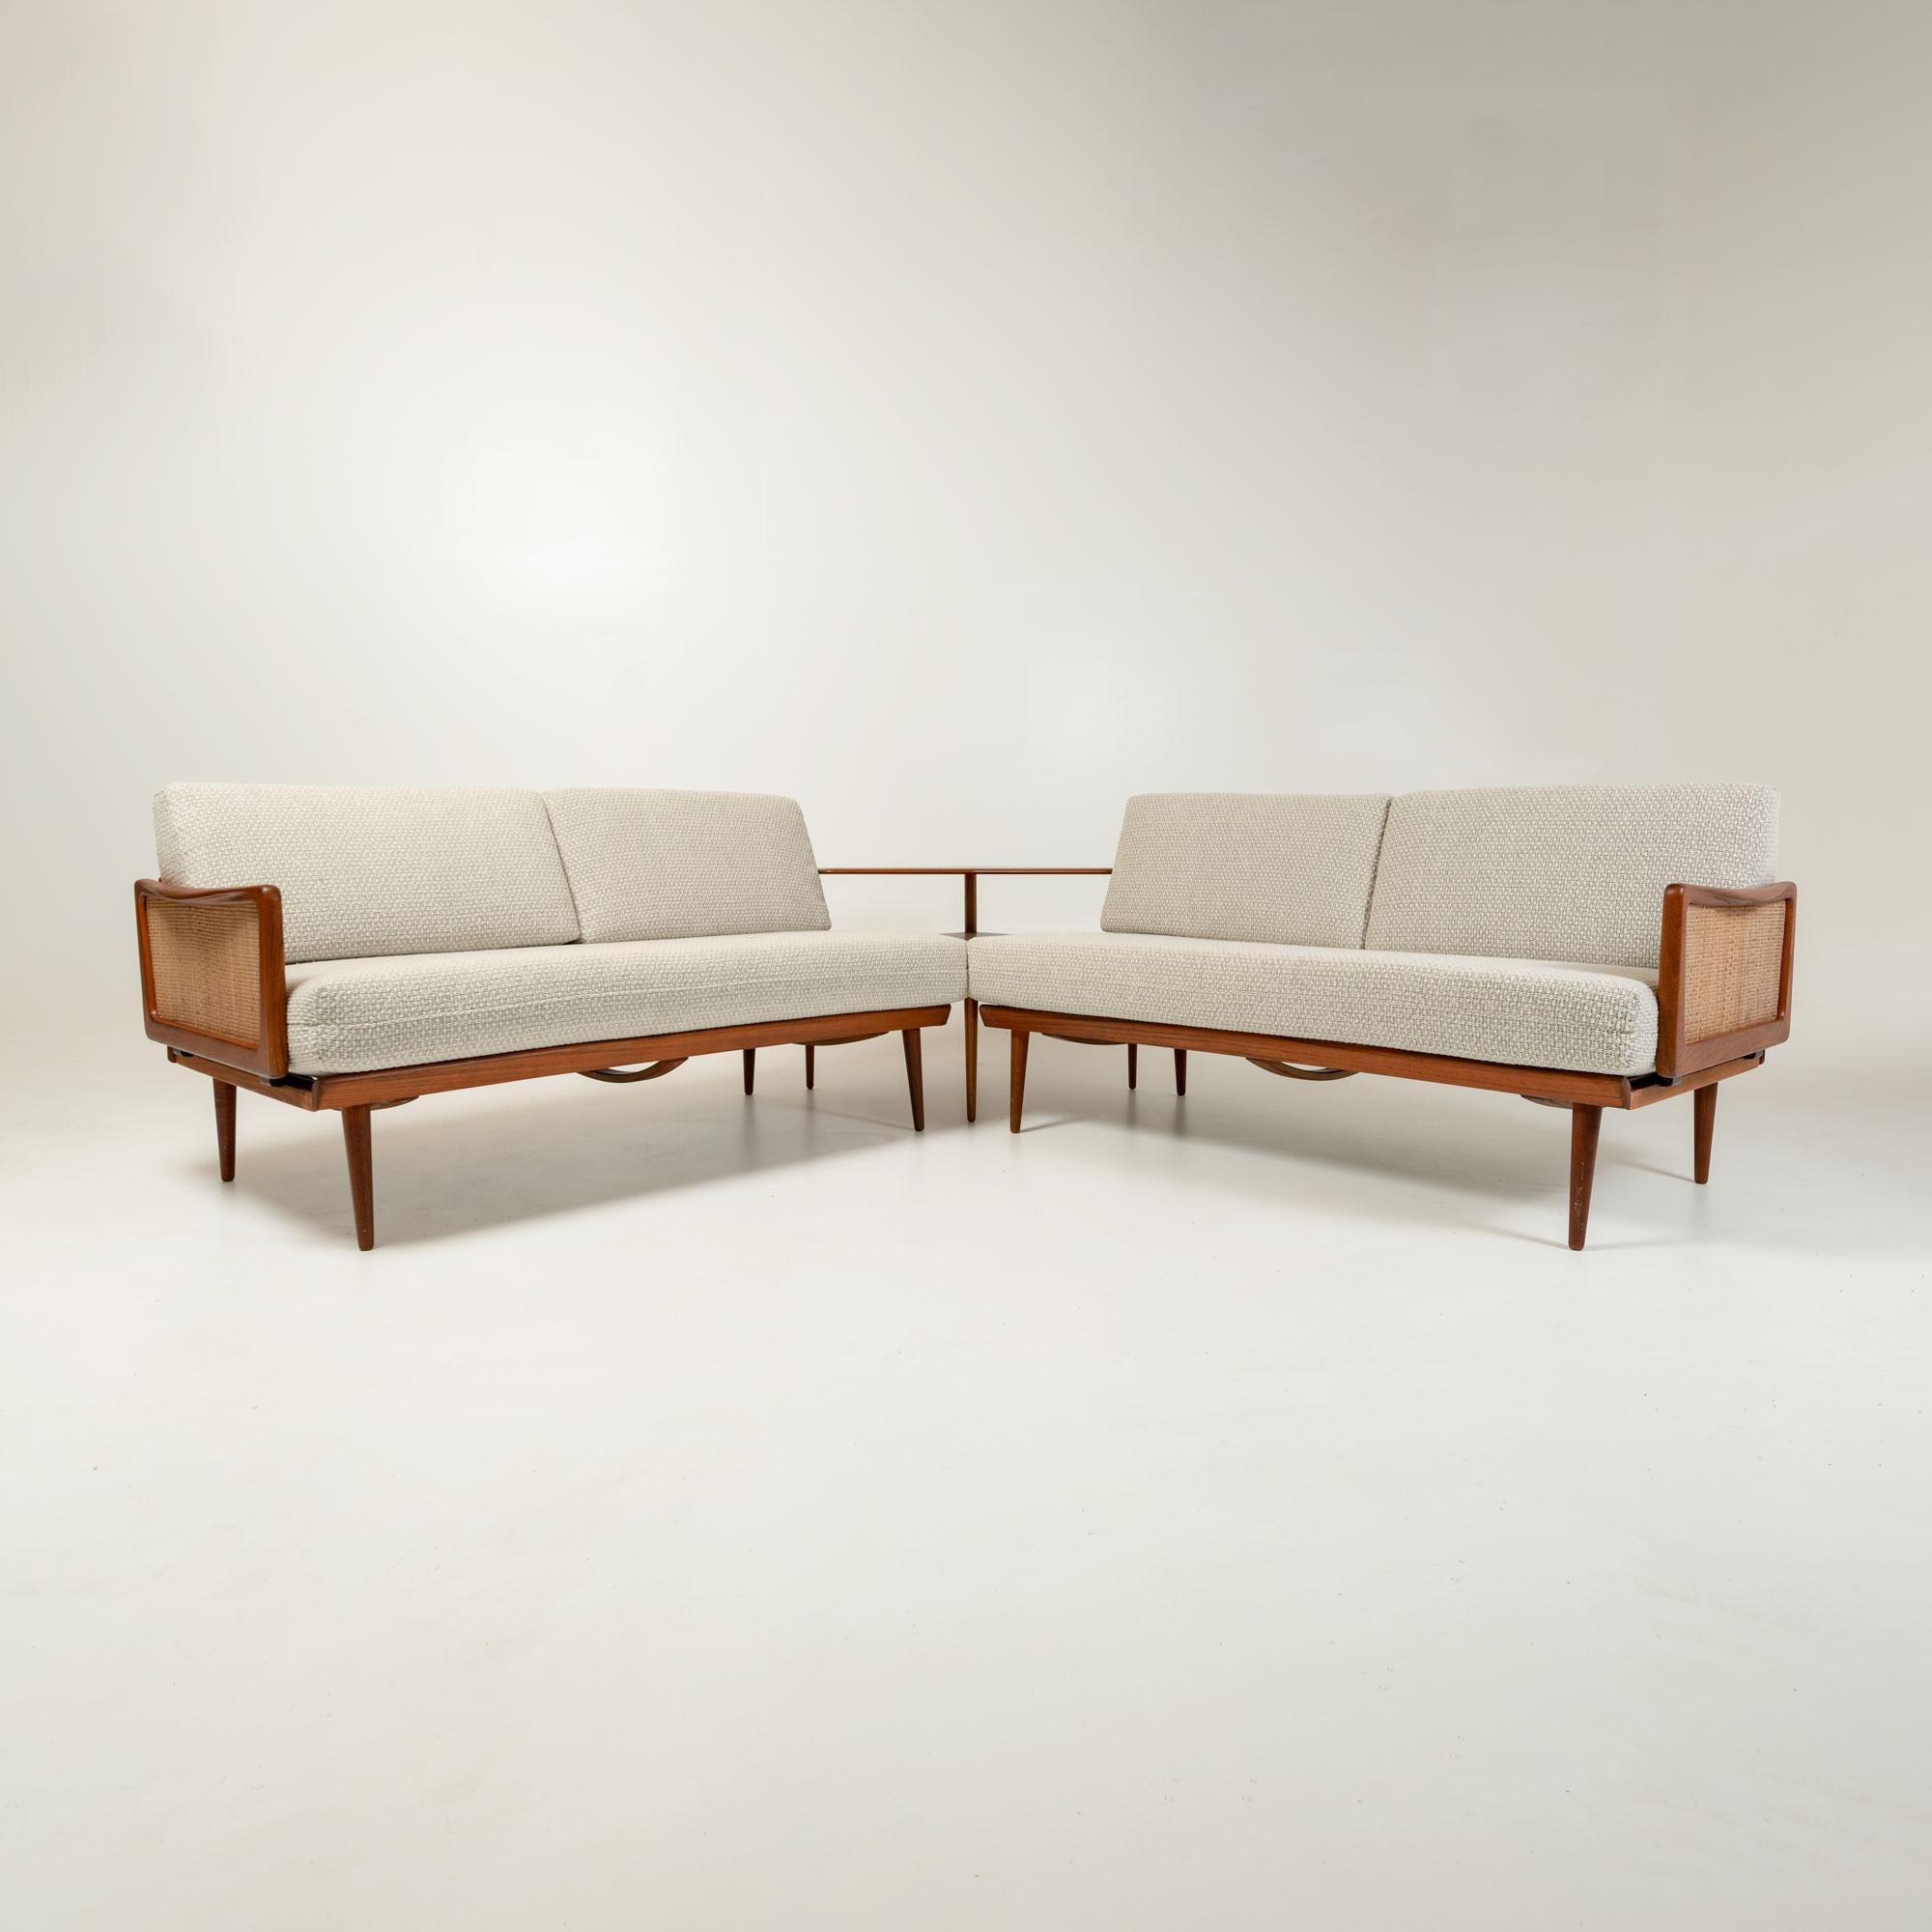 Fully Restored FD451 Sectional Sofas, designed by Peter Hvidt & Orla Mølgaard Nielsen and produced by France & Son. Cushions retained the original spring frame, while getting new foam and newly reupholstered in Salt and Pepper Bouclé.

This set